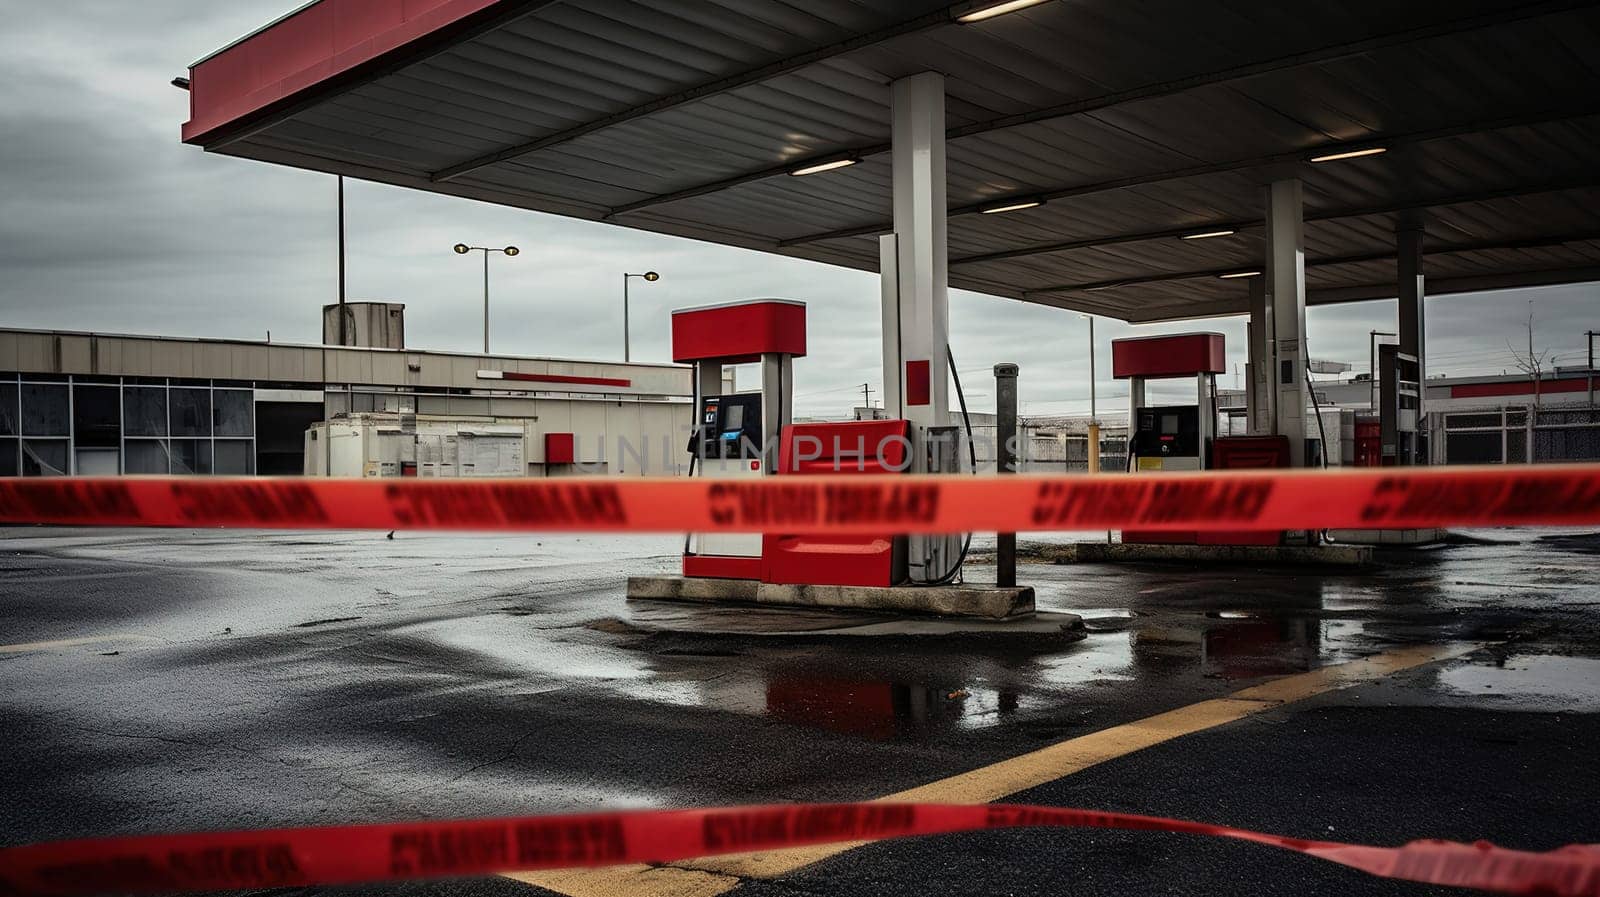 closed gas station without fuel, passage closed with red barrier tapes, gray hopeless morning, energy crisis by KaterinaDalemans